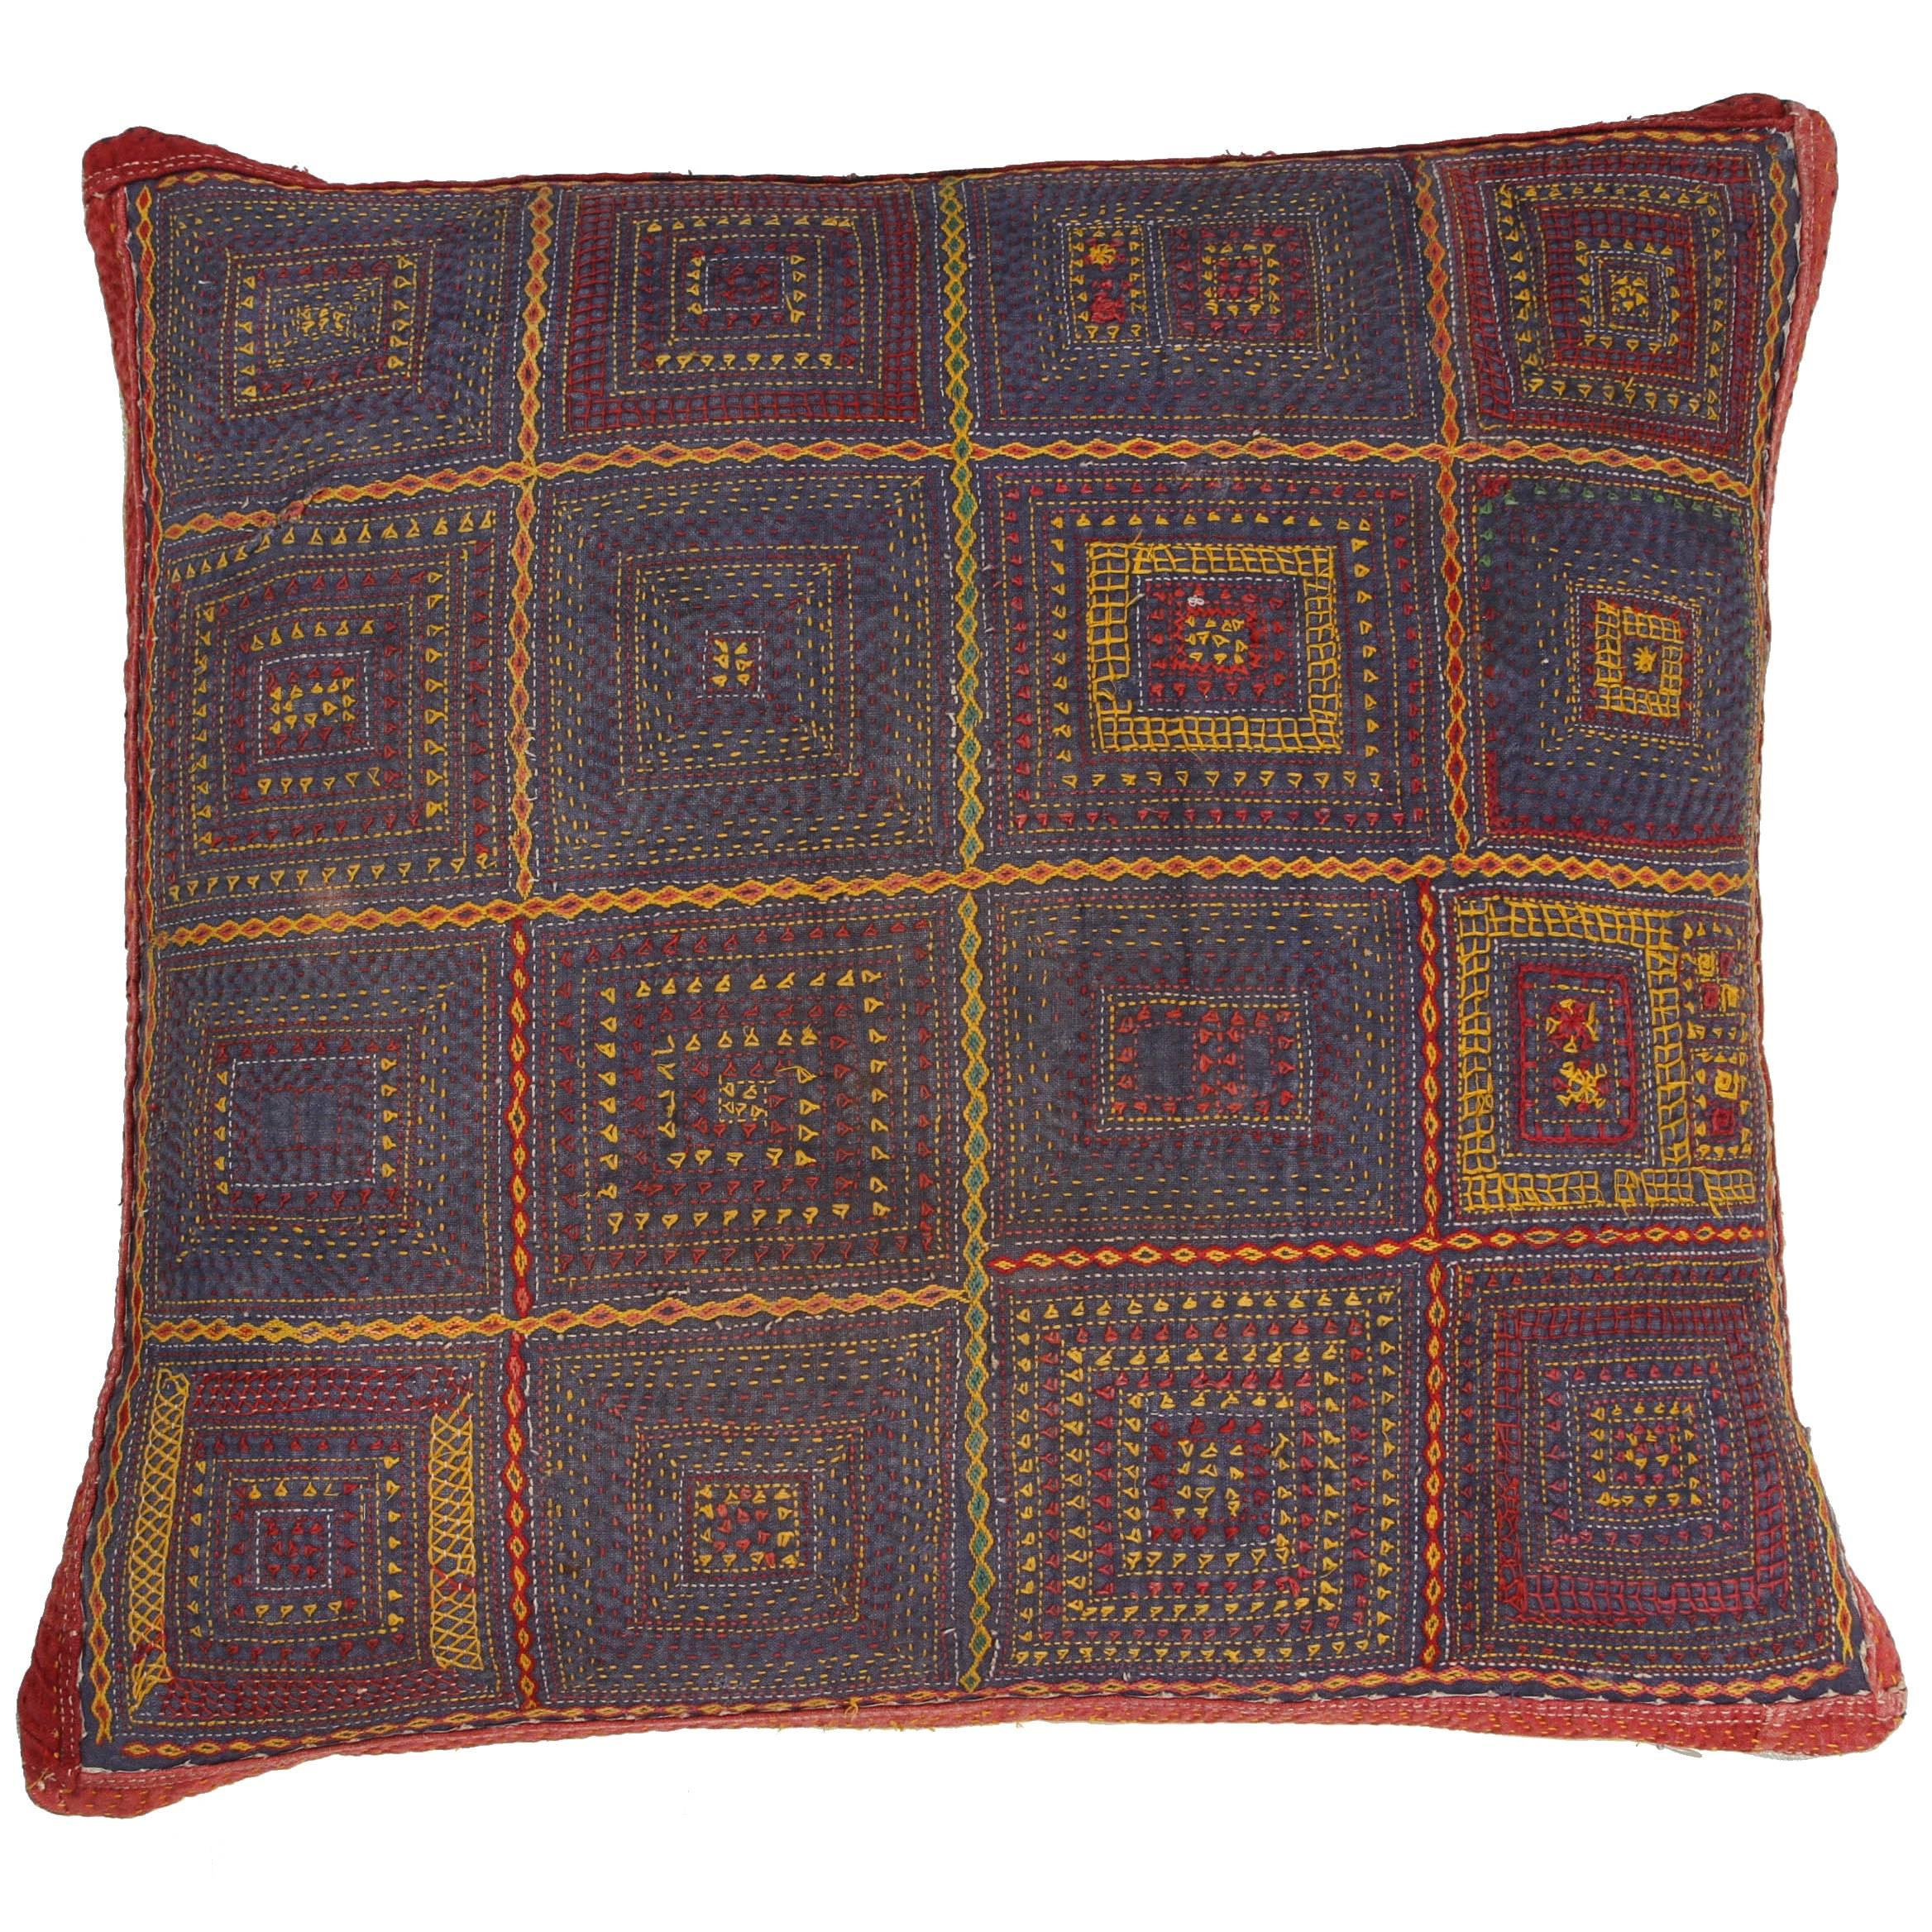 Gujarati Embroidery Pillow, Geometric Motif, Blue, Orange, Yellow and Red For Sale